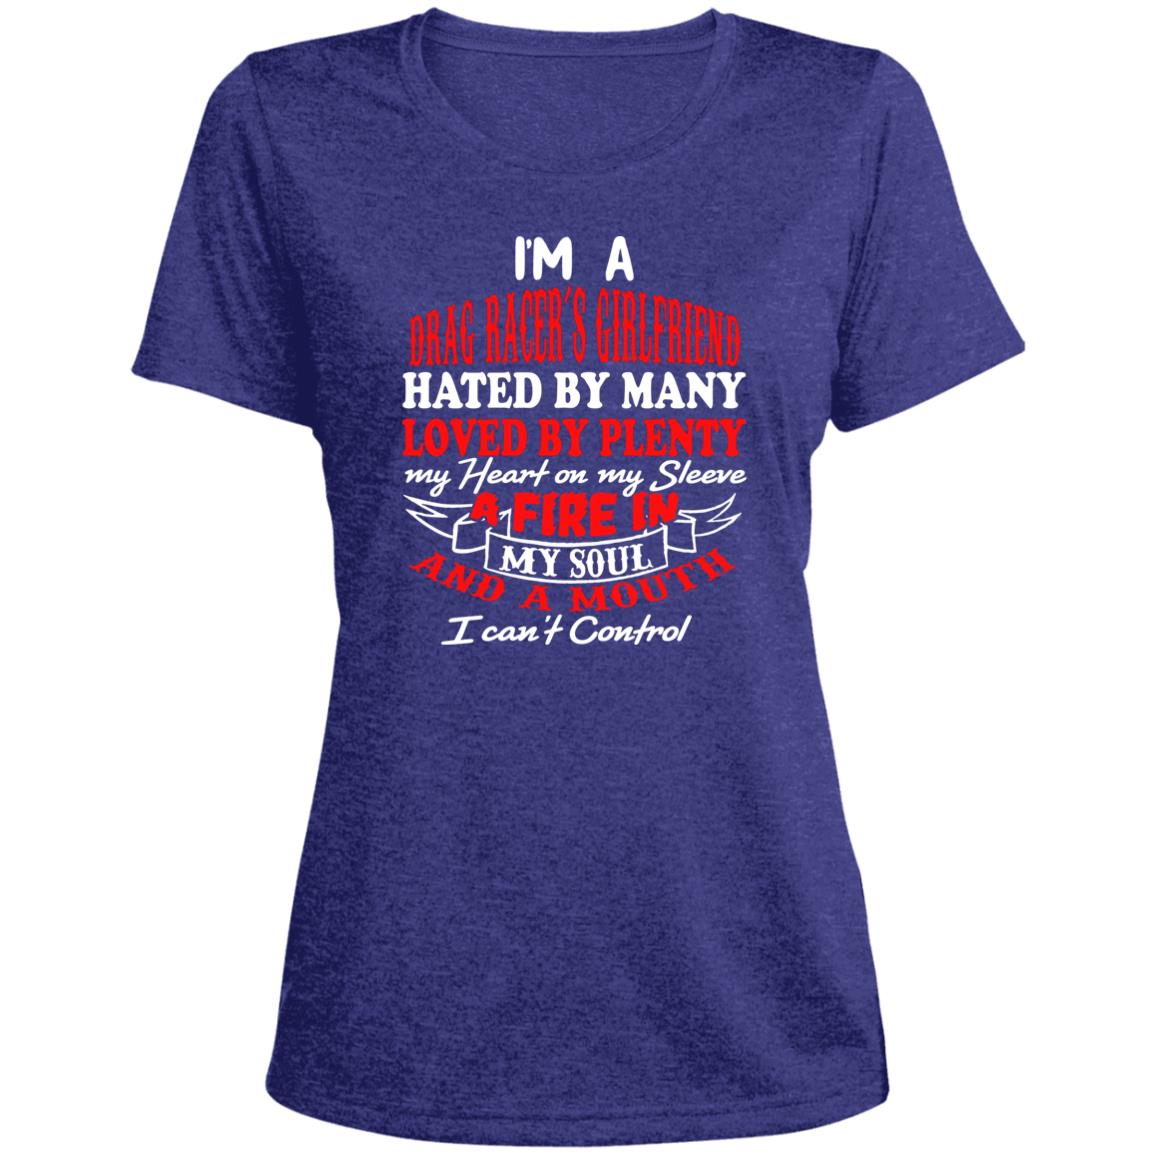 I'm A Drag Racer's Girlfriend Hated By Many Loved By Plenty Ladies' Heather Scoop Neck Performance Tee